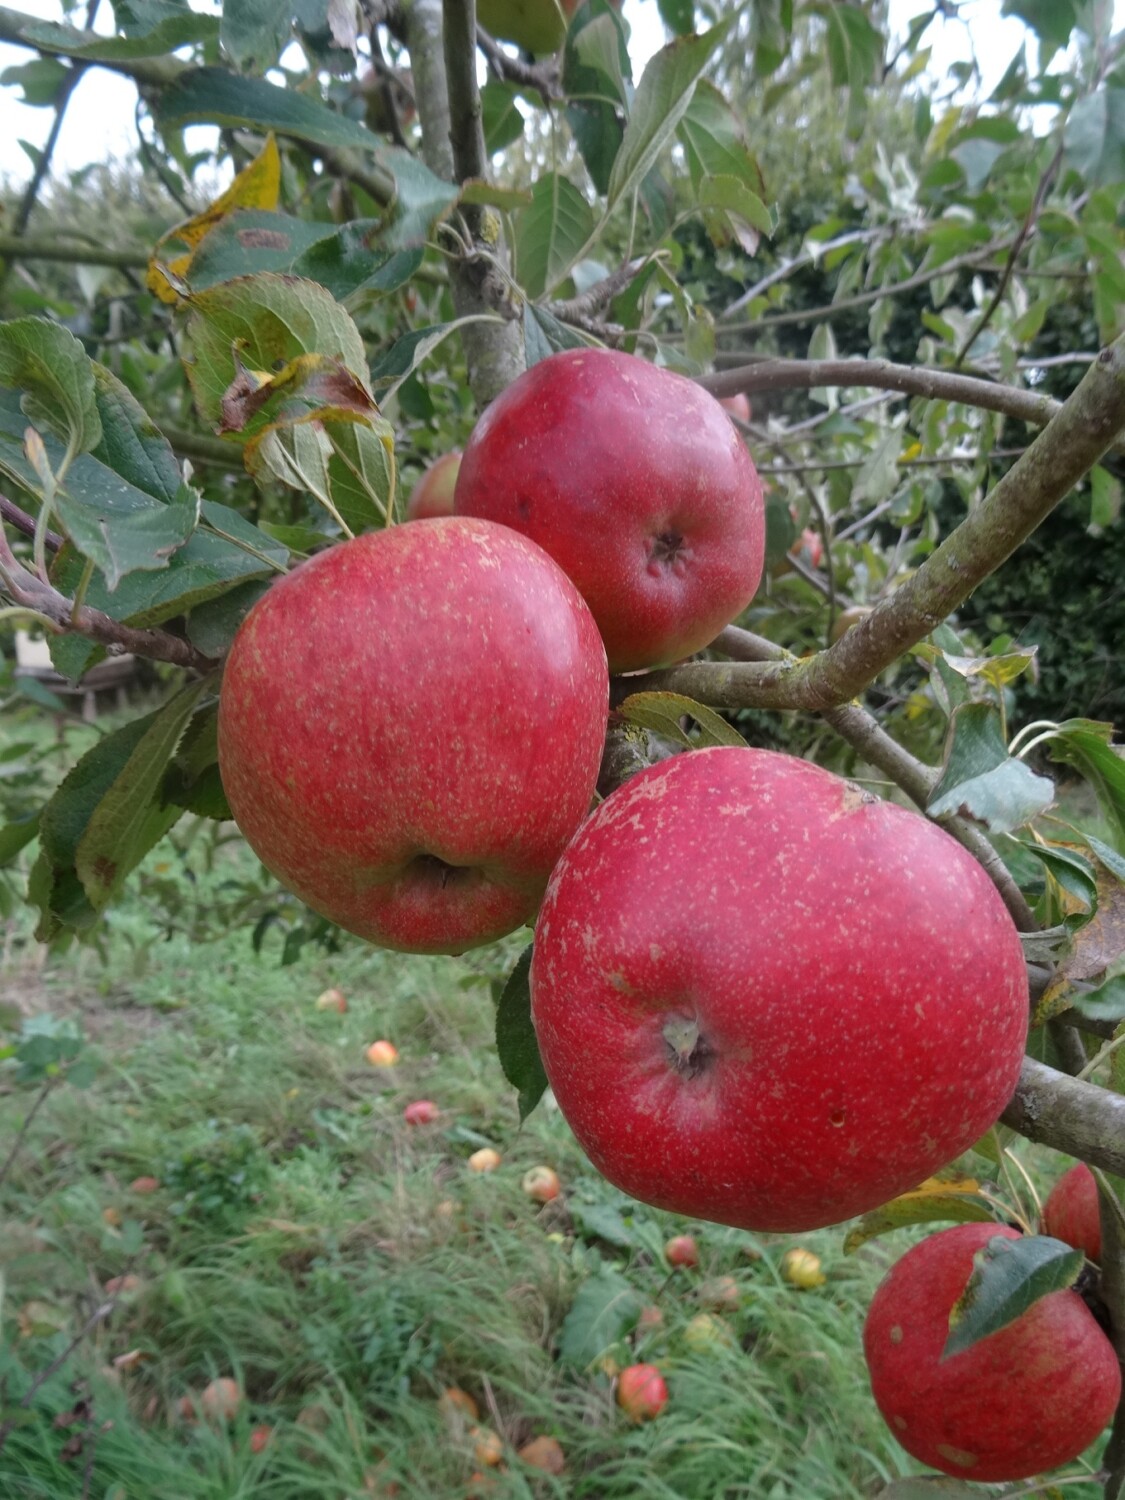 Lord Hindlip apples ready to pick